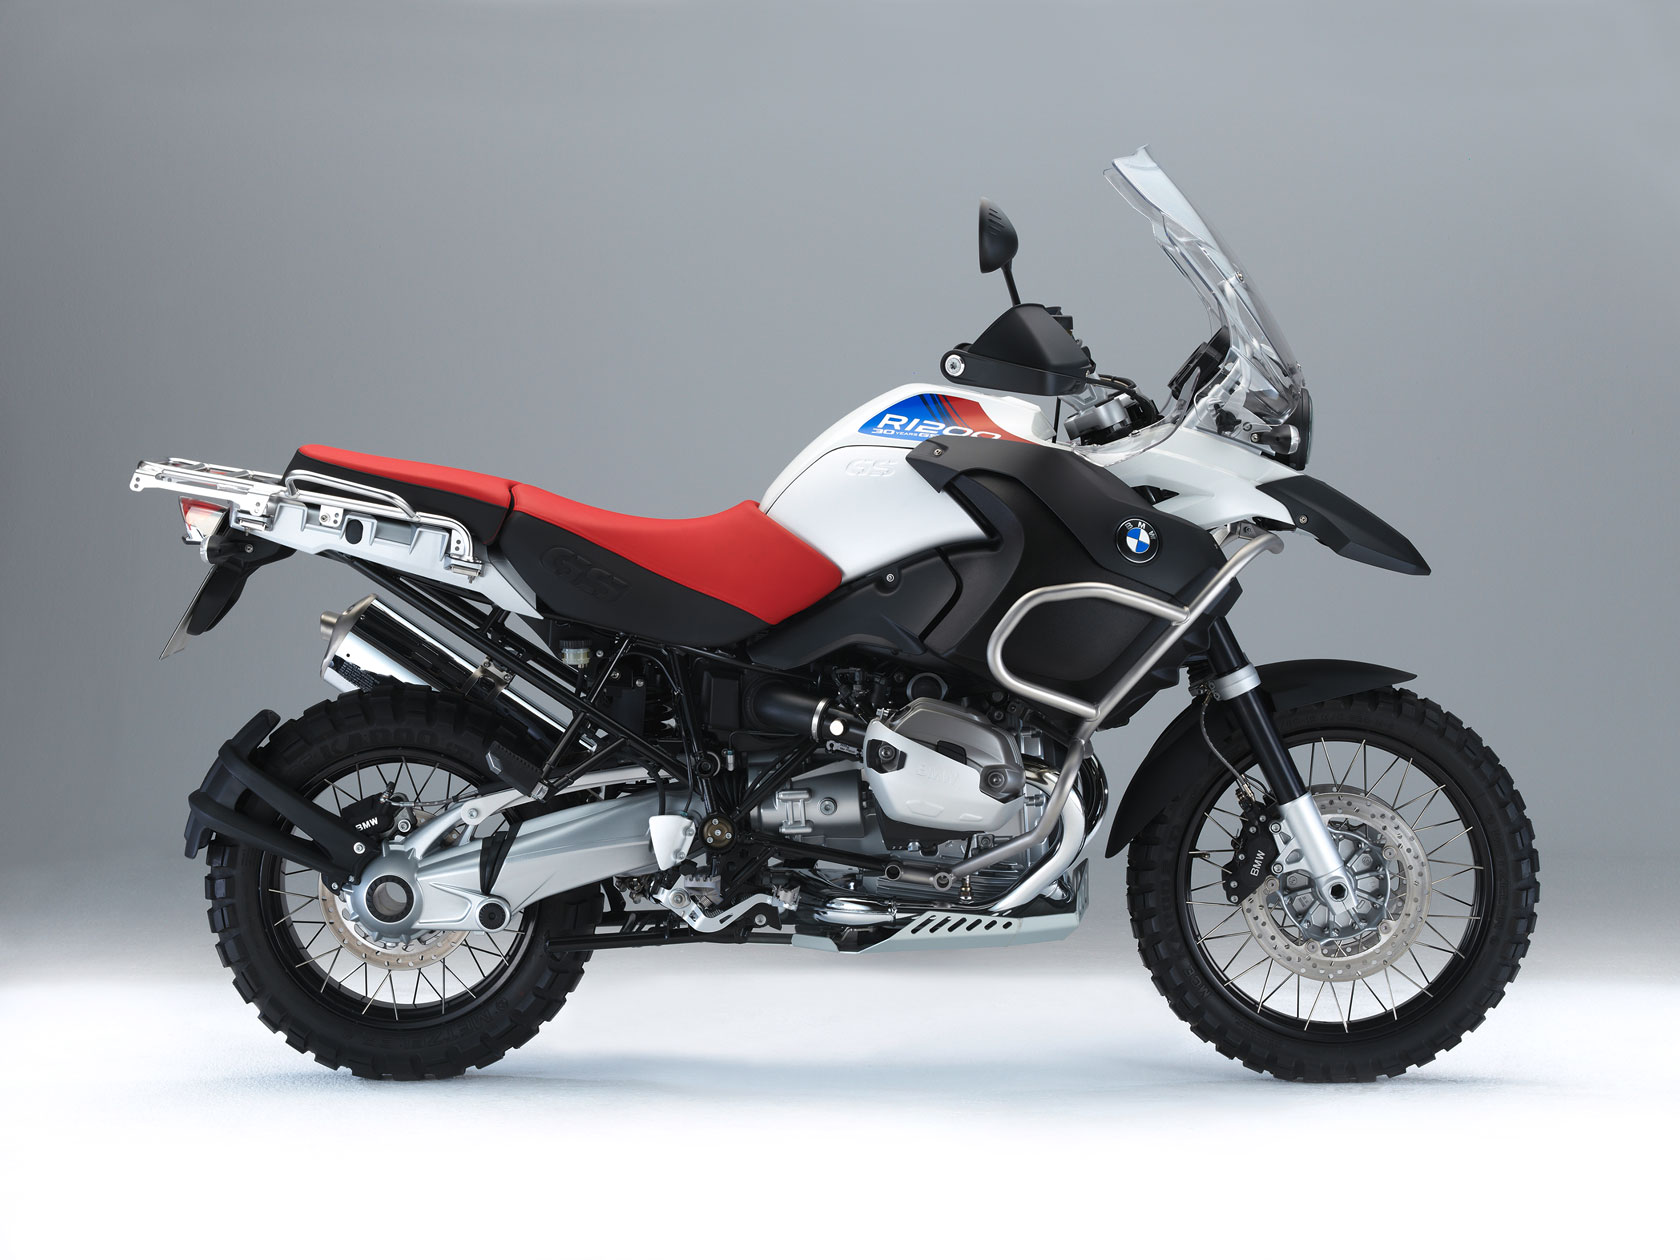 BMW R 1200 GS Adventure "30 Years GS" Special Model specs